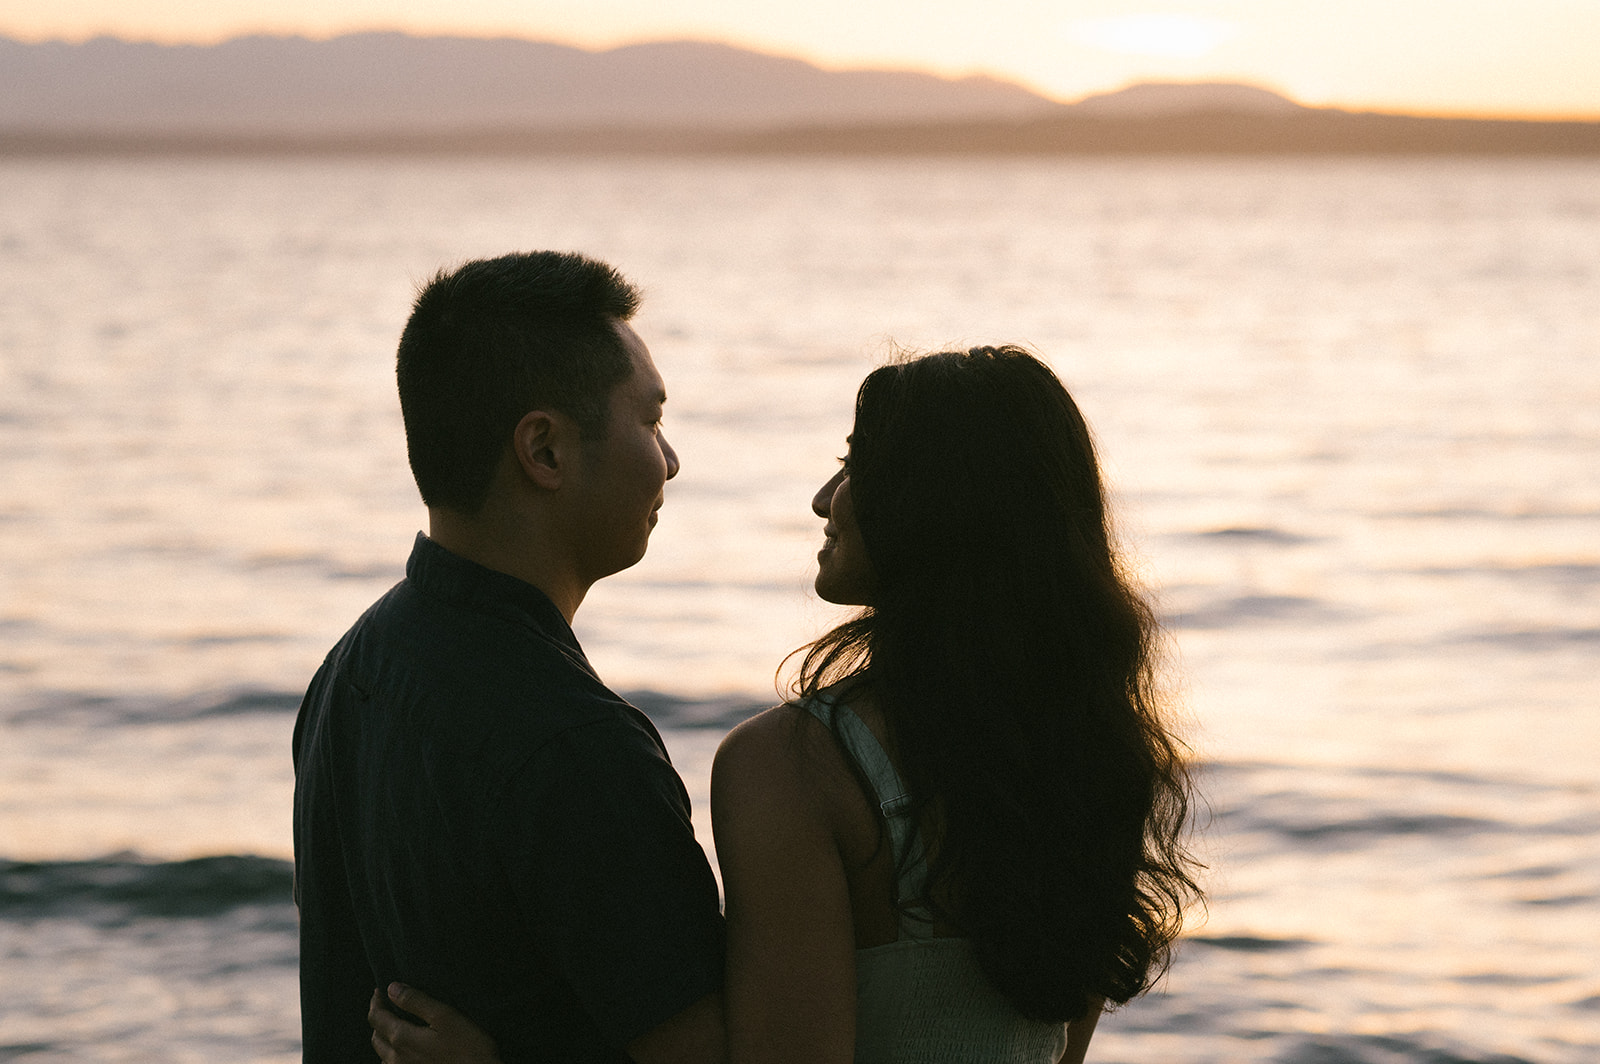 A couple silhouetted against the sunset, looking into each other's eyes by the water.